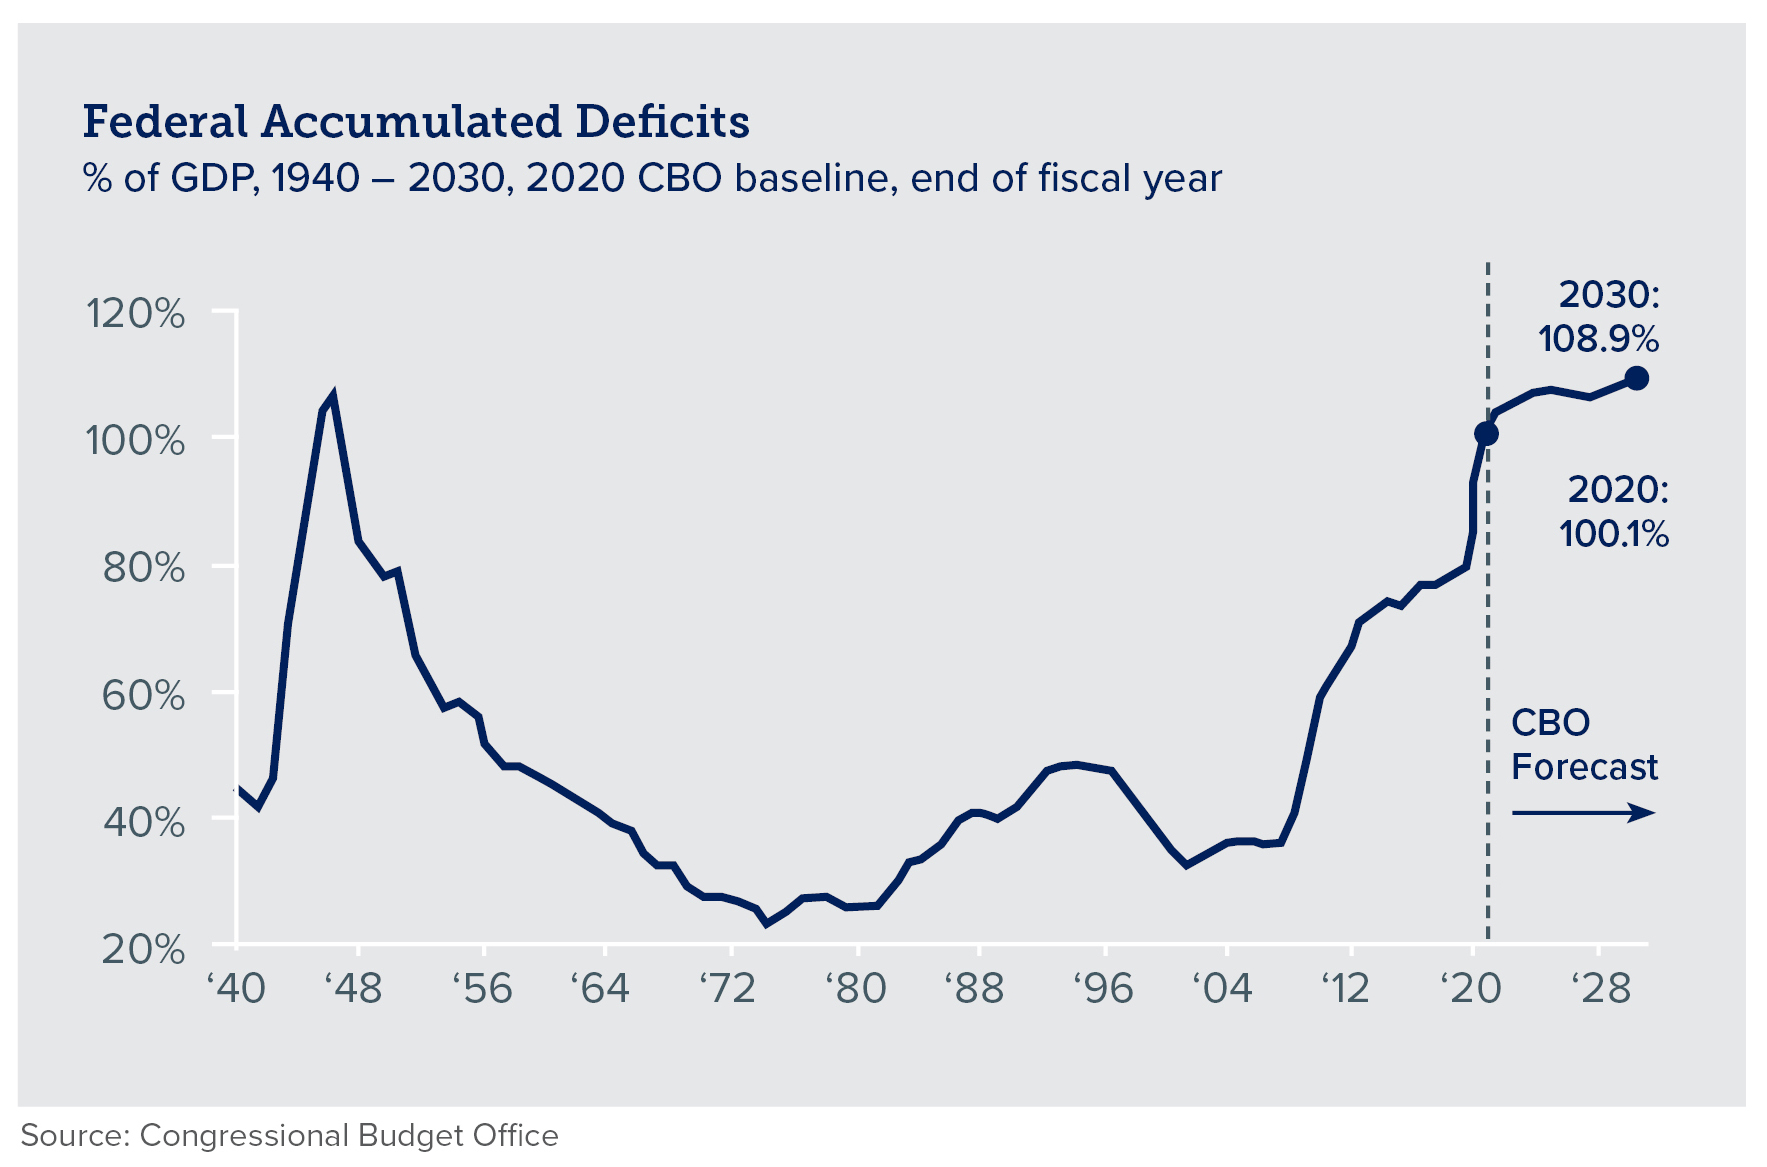 Chart of federal accumulated deficits since 1940